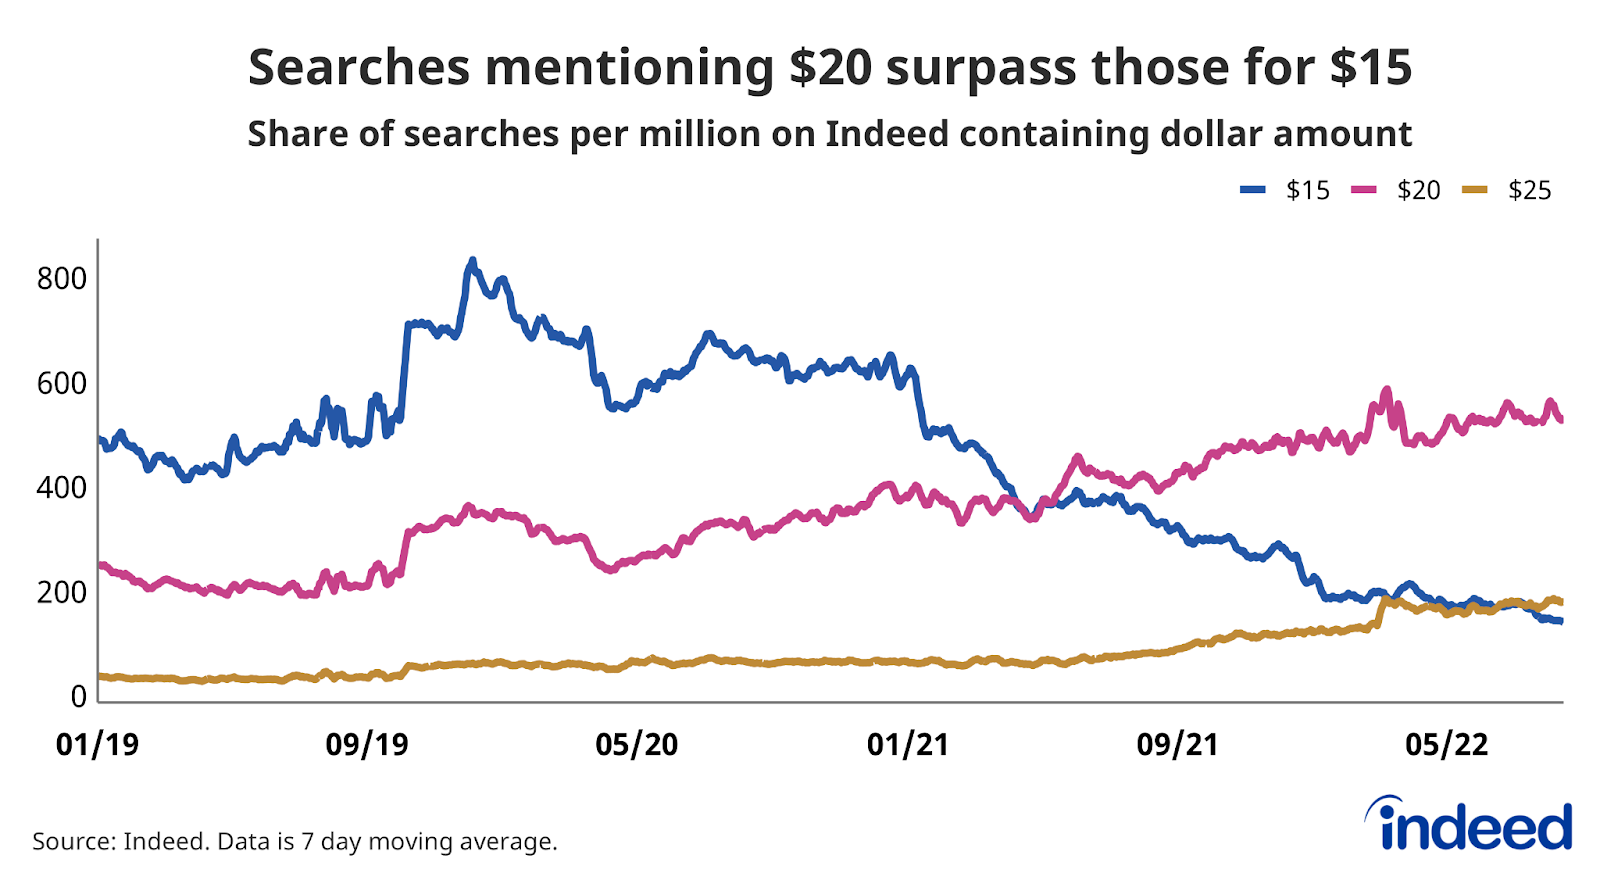 Line graph titled “Searches mentioning $20 surpass those for $15.”